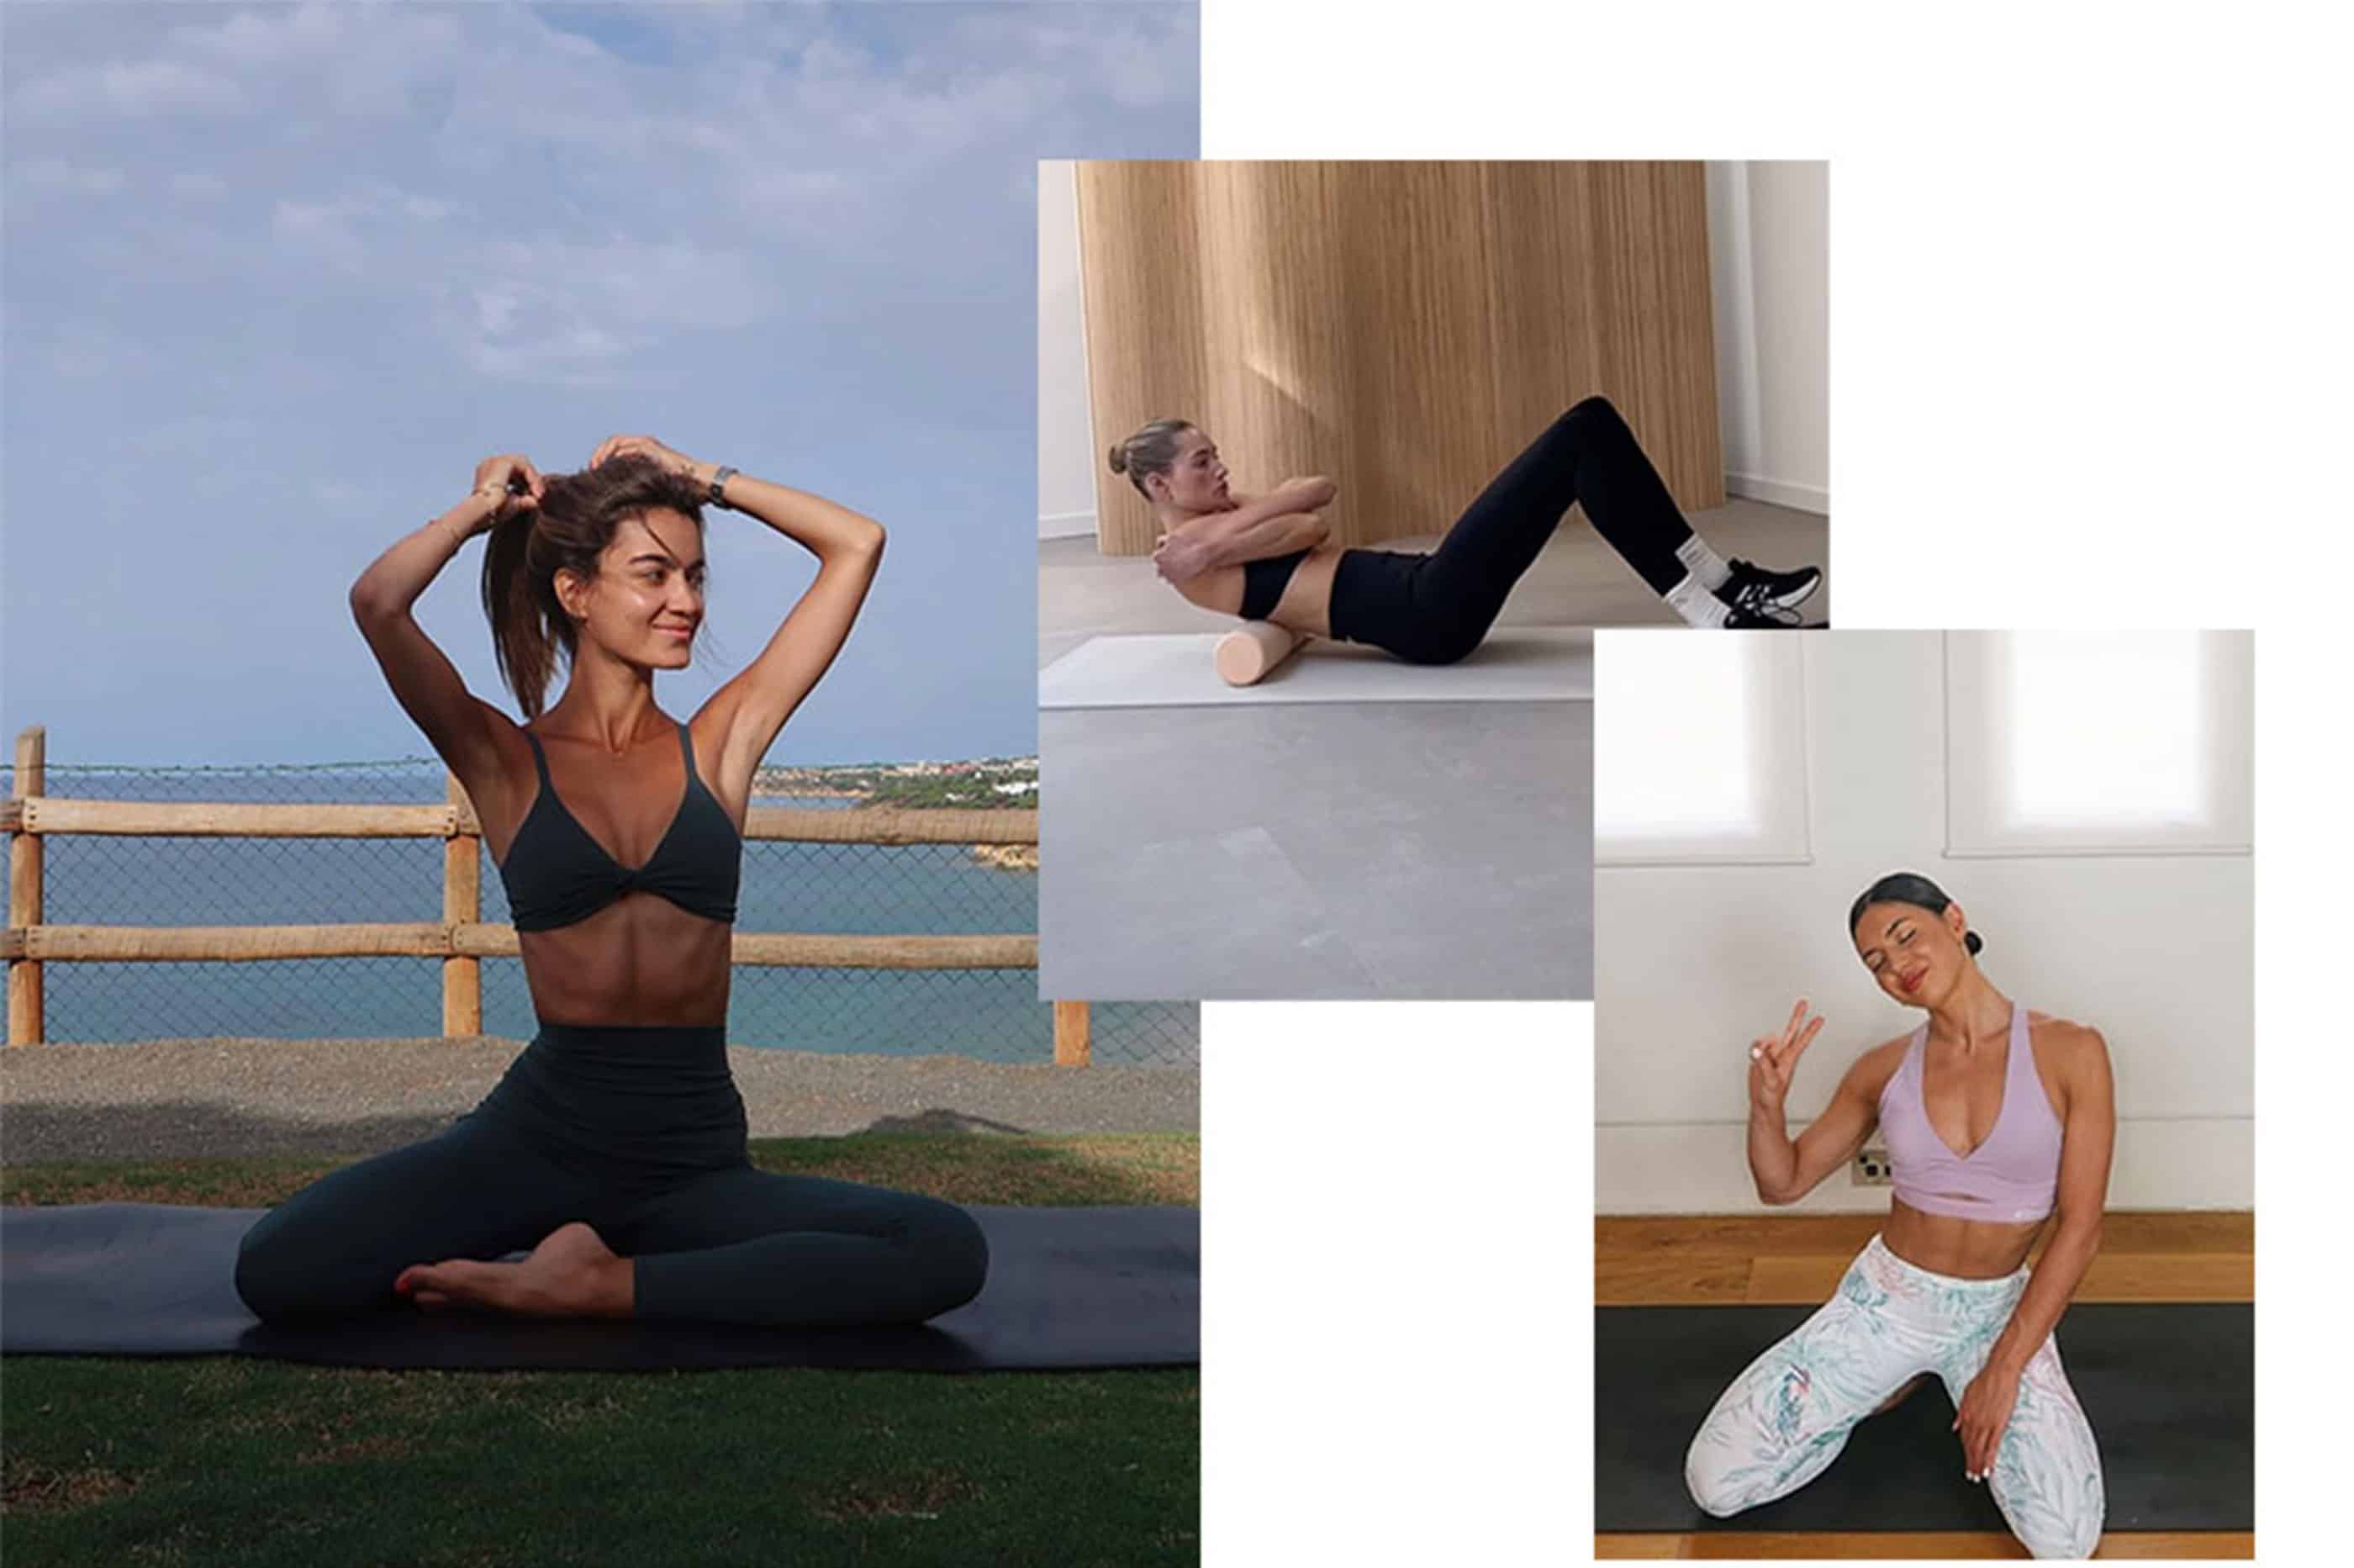 Pilates at Home - Pilates at Home Equipment